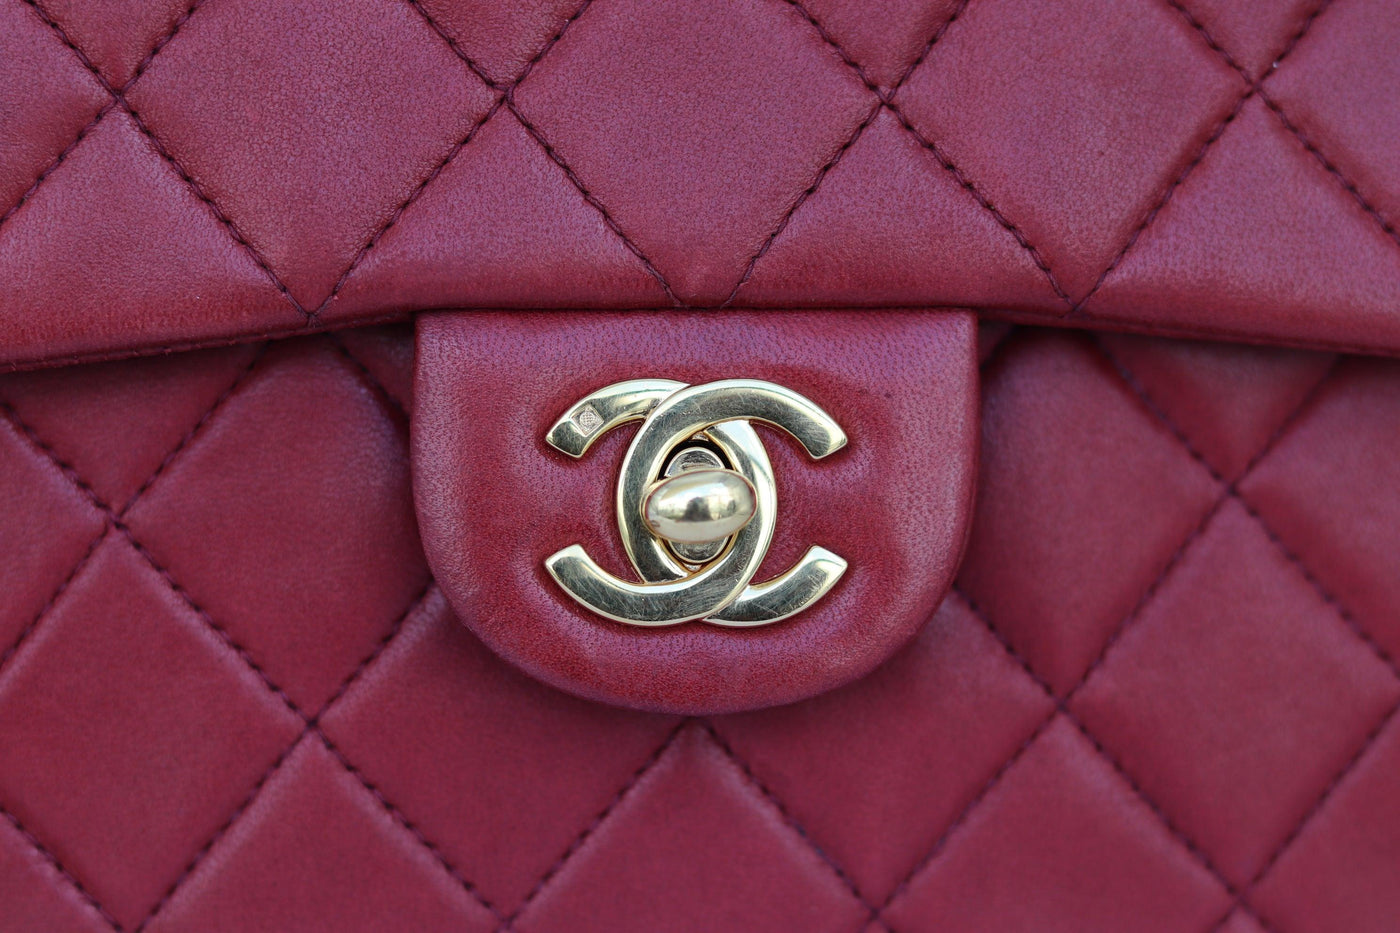 Chanel Red Mini Square Lambskin Quilted Flap SHW